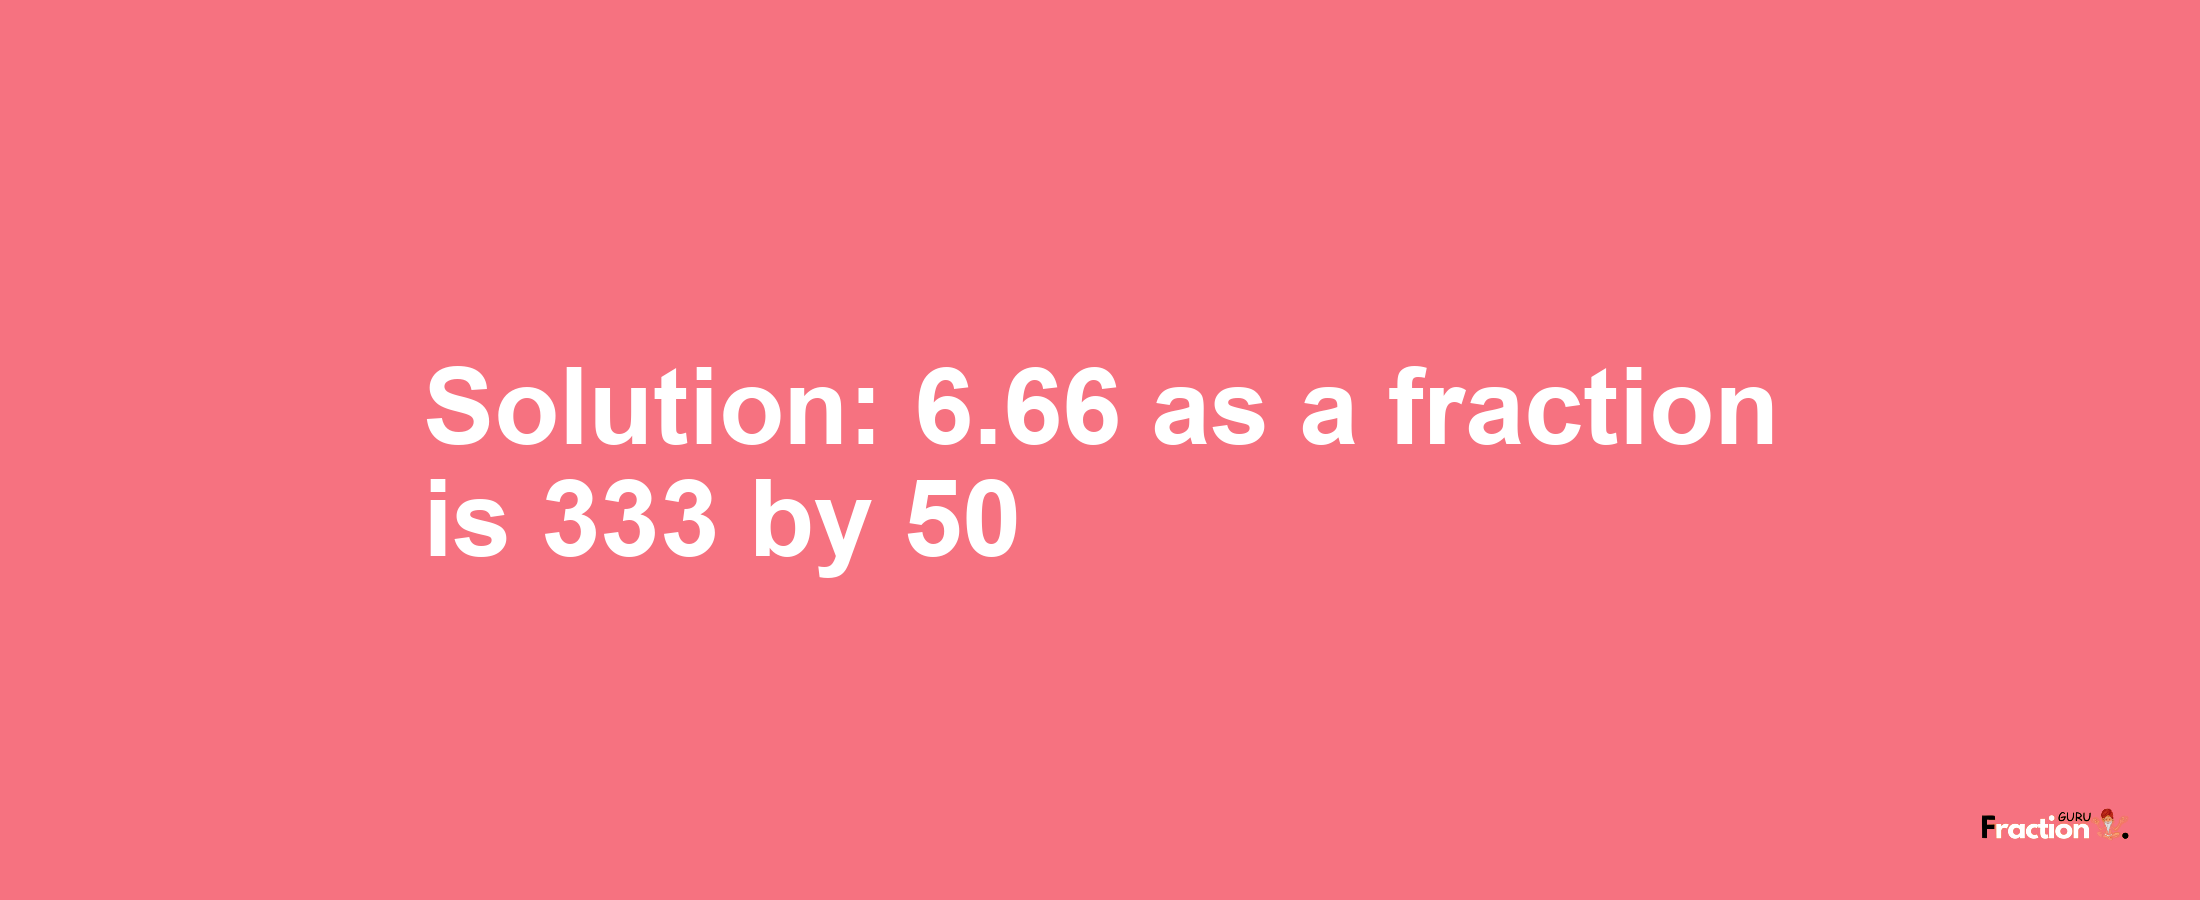 Solution:6.66 as a fraction is 333/50